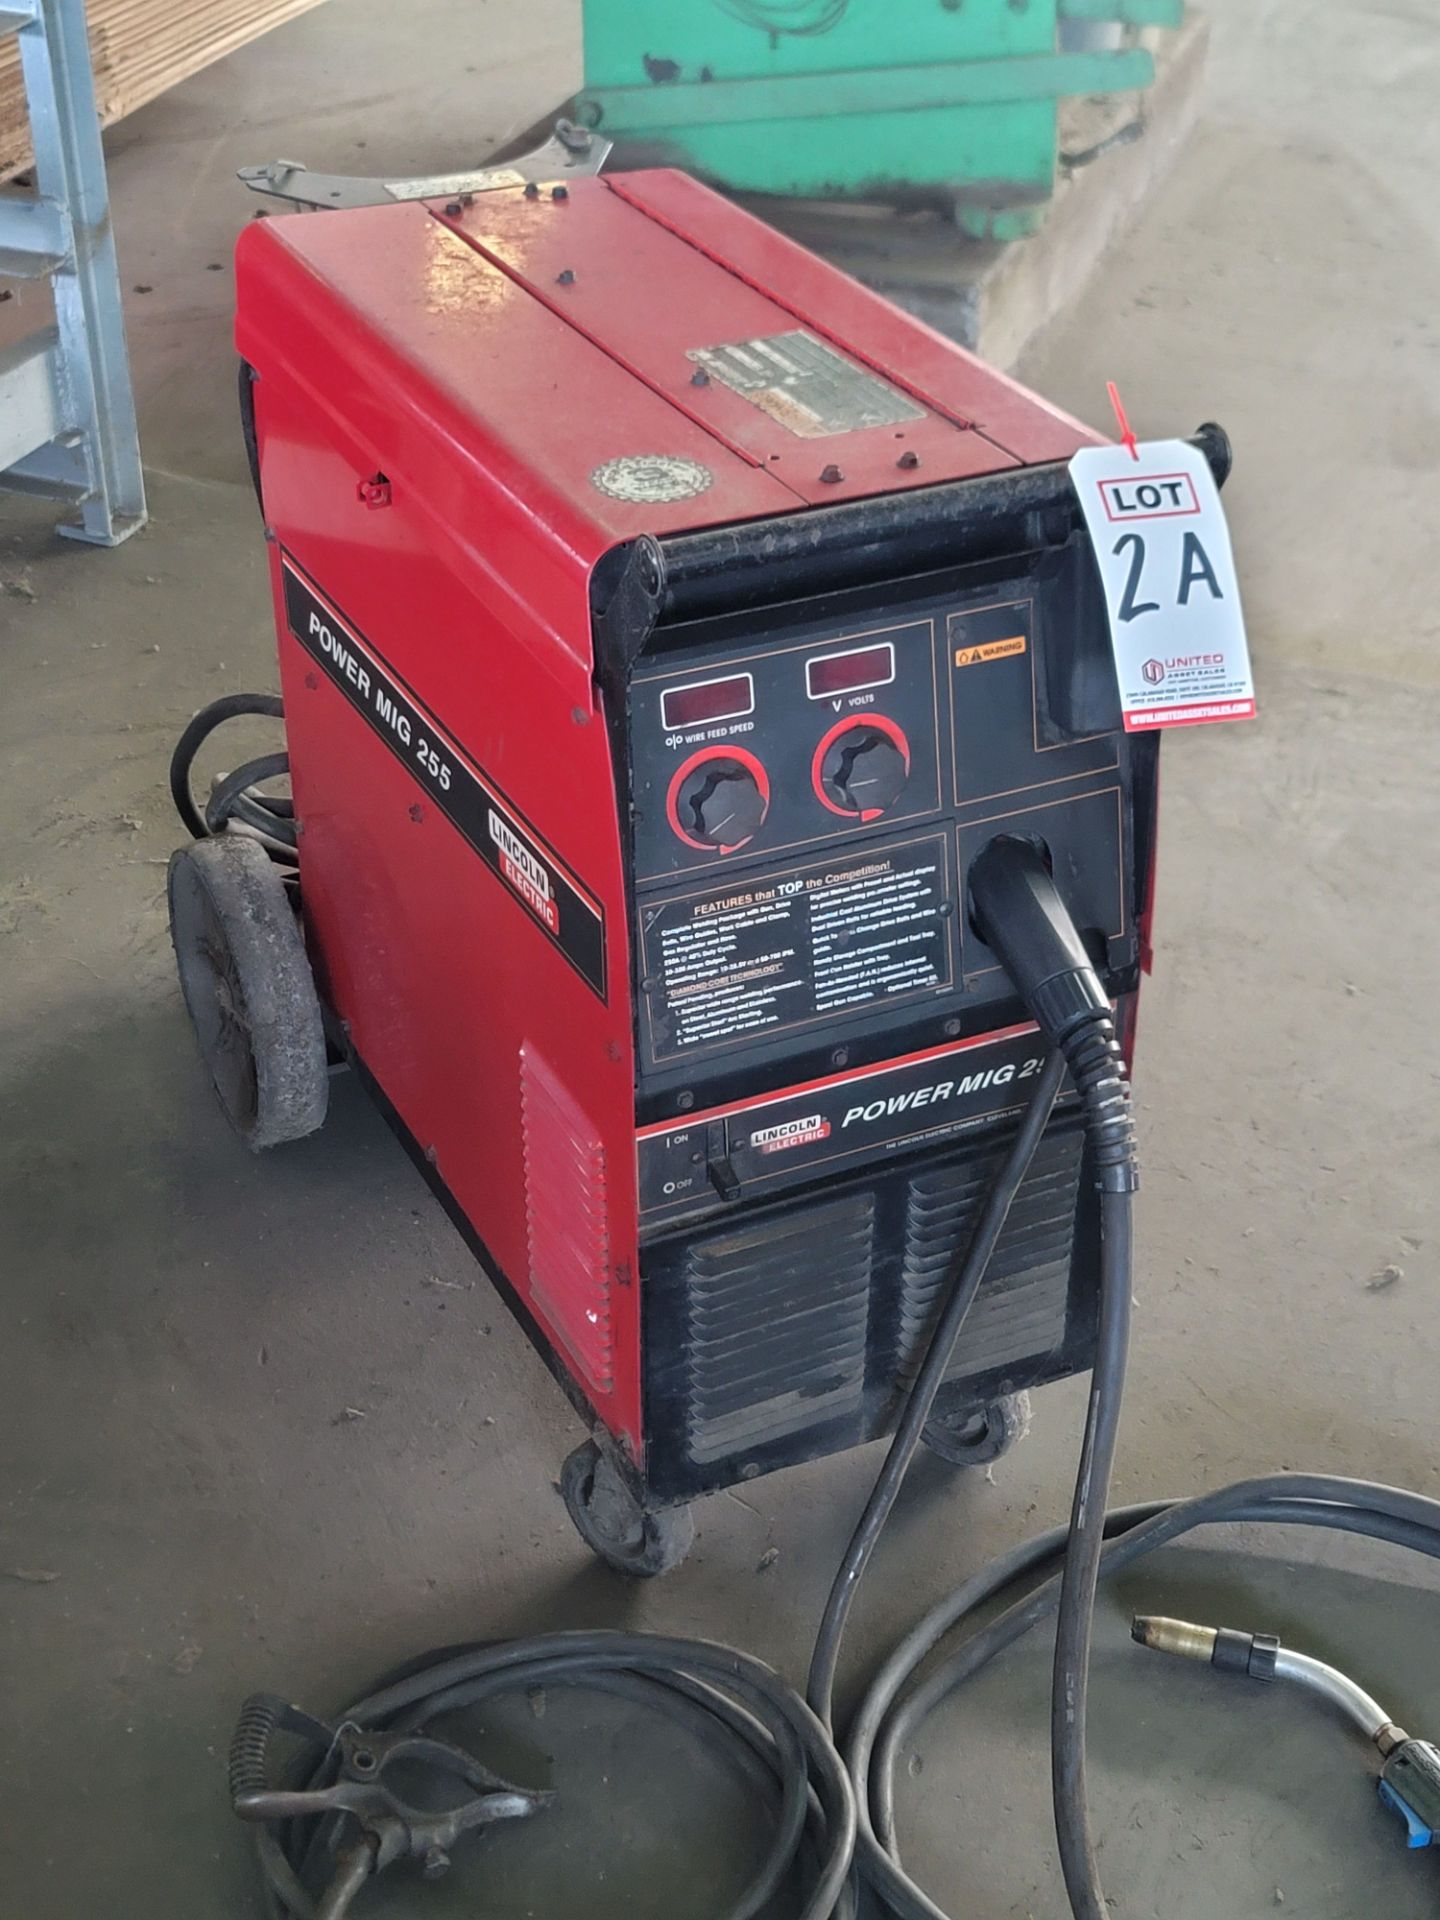 LINCOLN ELECTRIC POWER MIG 255 WELDER, K1693-2, S/N U1991202291, TANK IS NOT INCLUDED